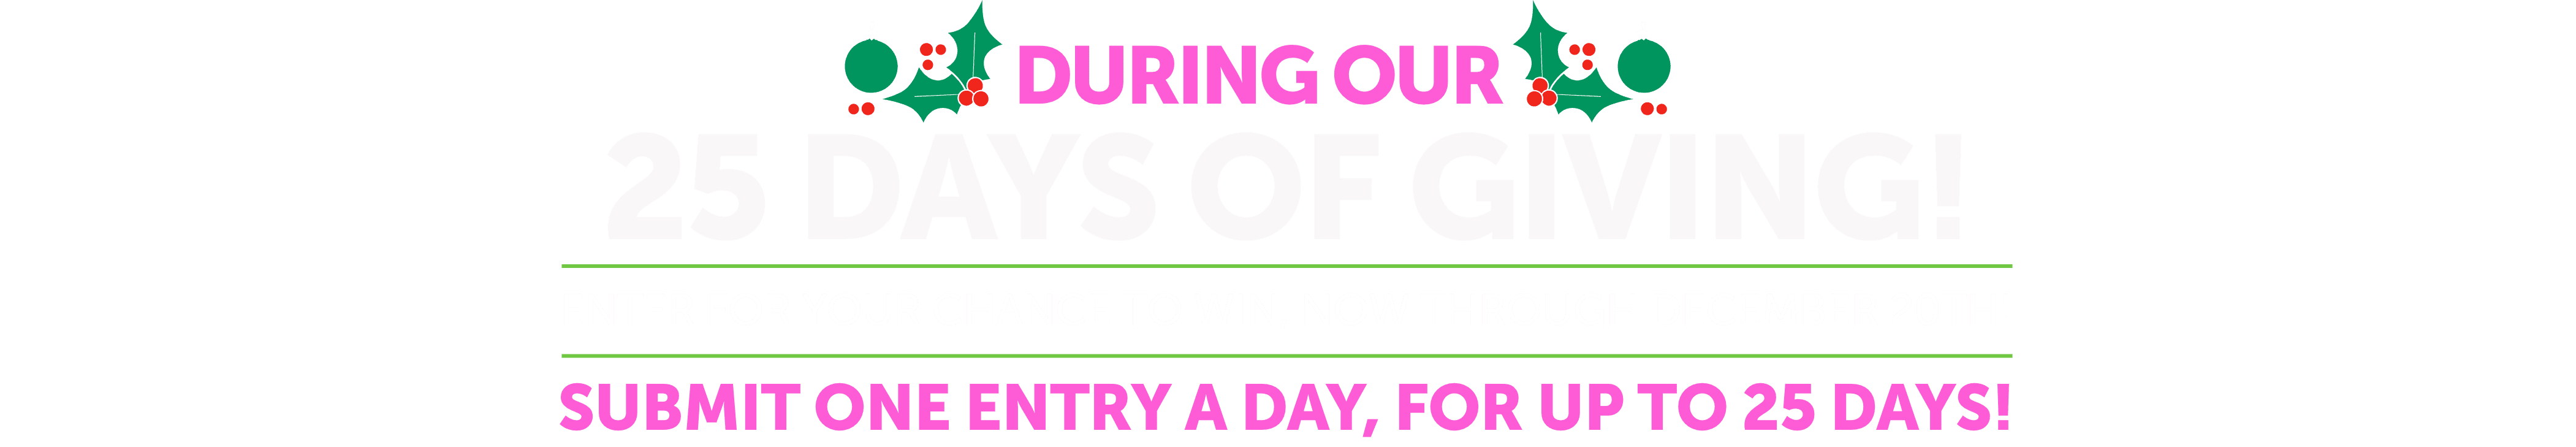 25 DAYS OF GIVING